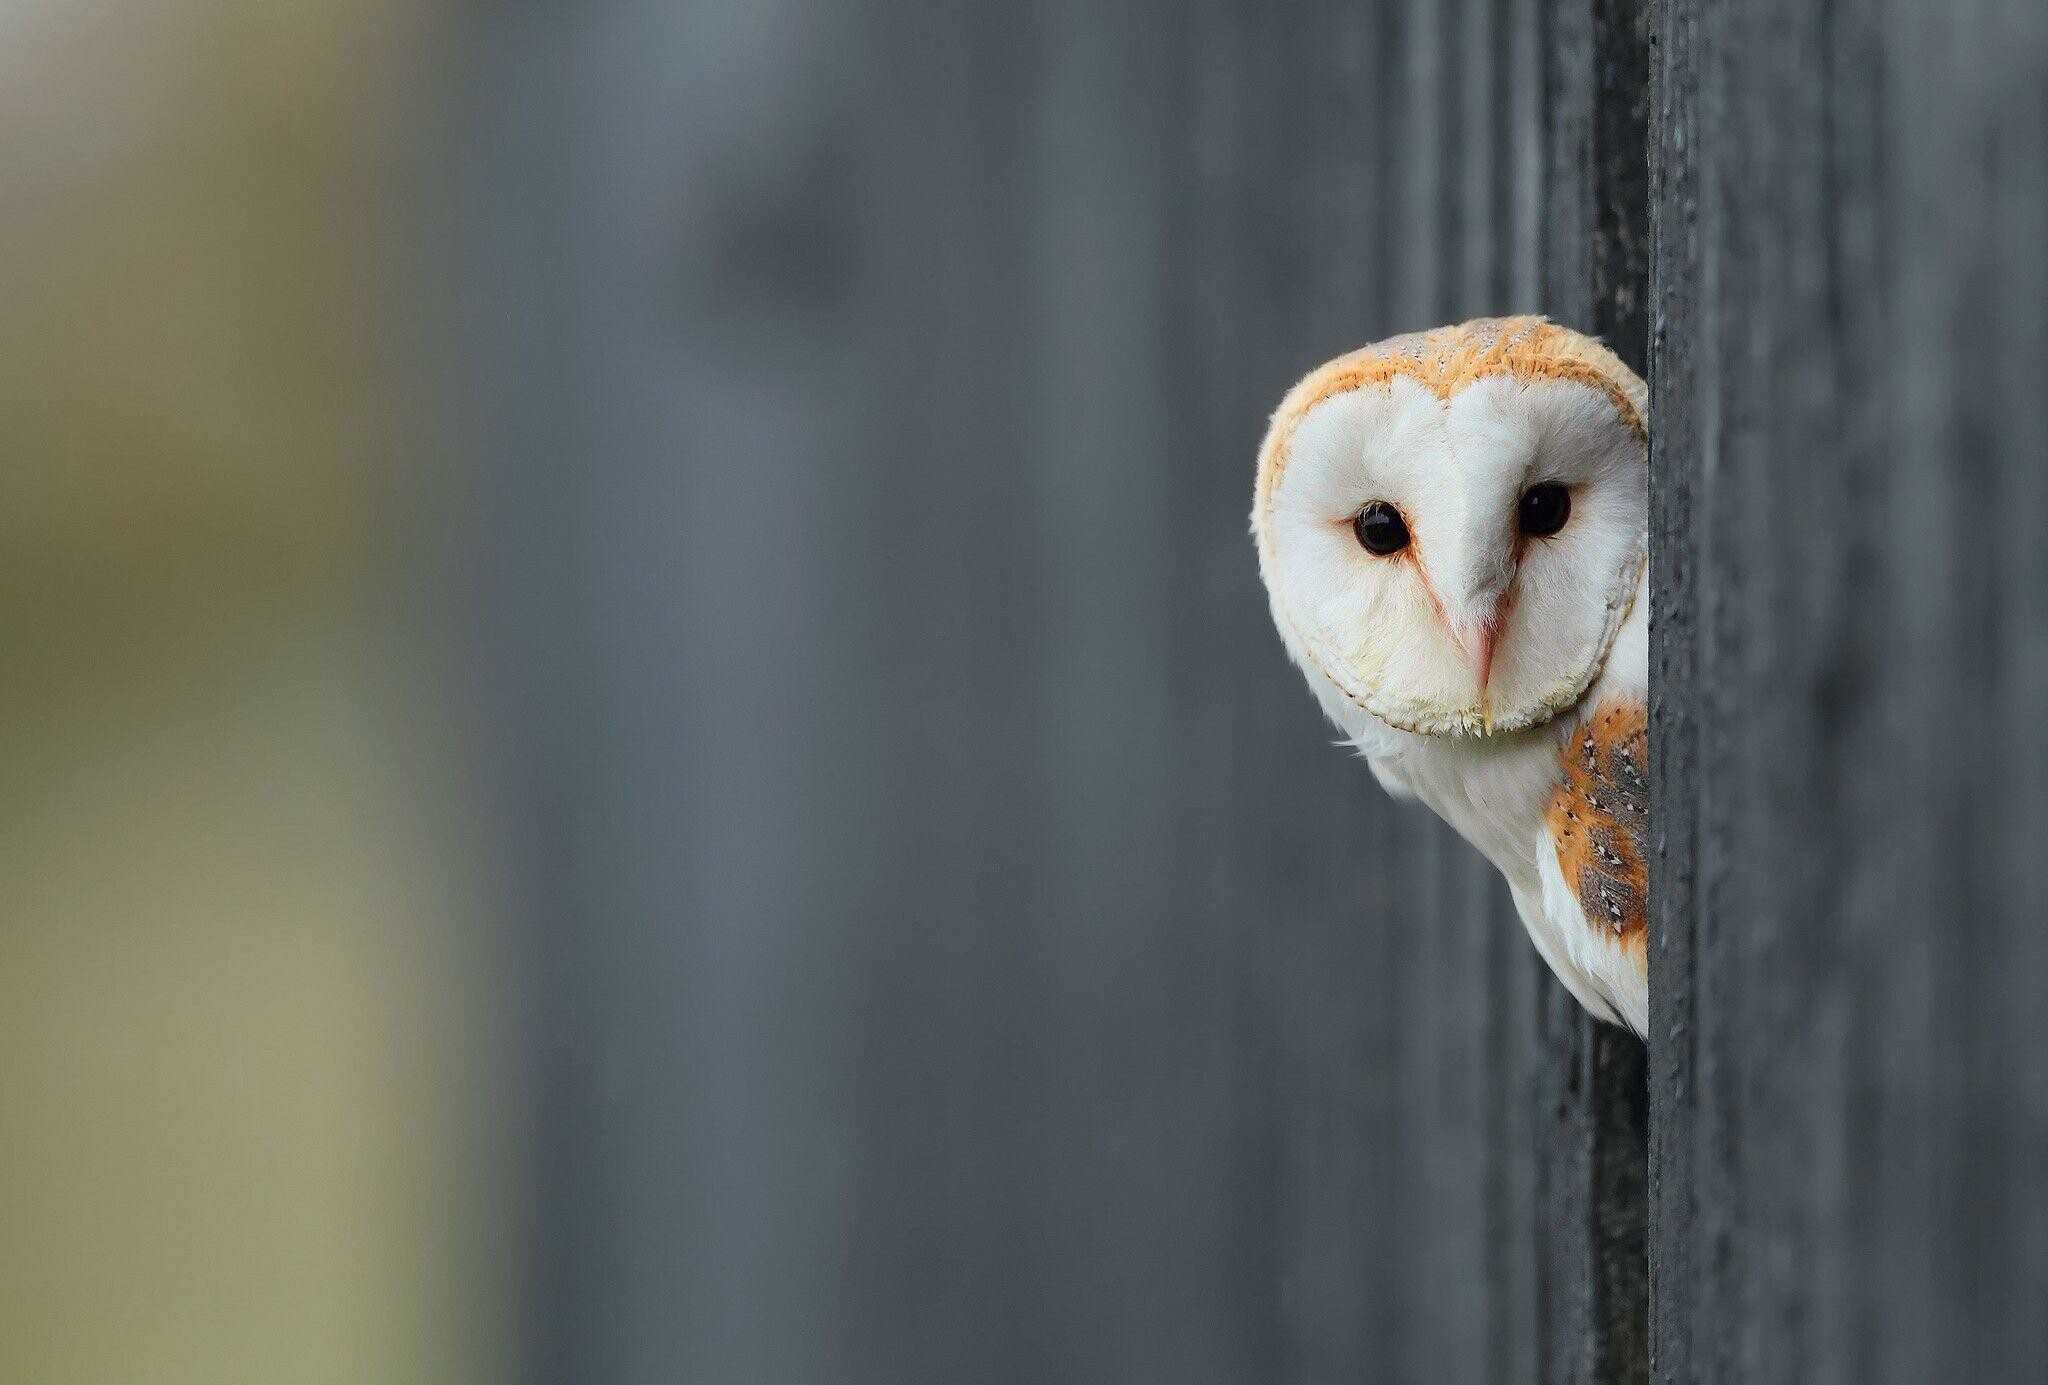 72+ Owl Wallpapers: HD, 4K, 5K for PC and Mobile | Download free images for  iPhone, Android